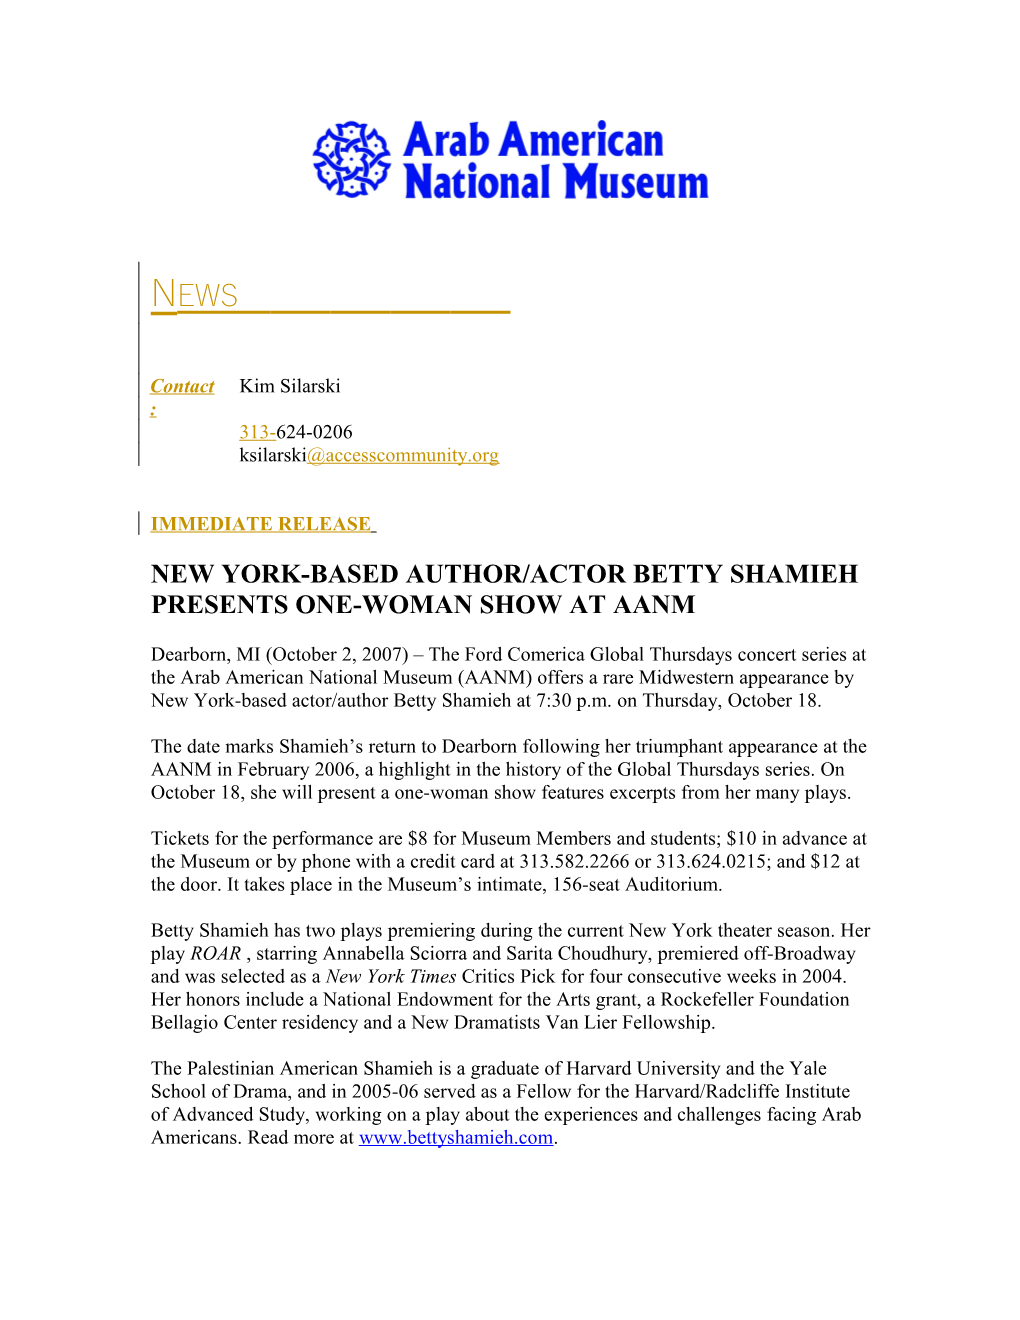 New York-Based Author/Actor Betty Shamieh Presents One-Woman Show at Aanm